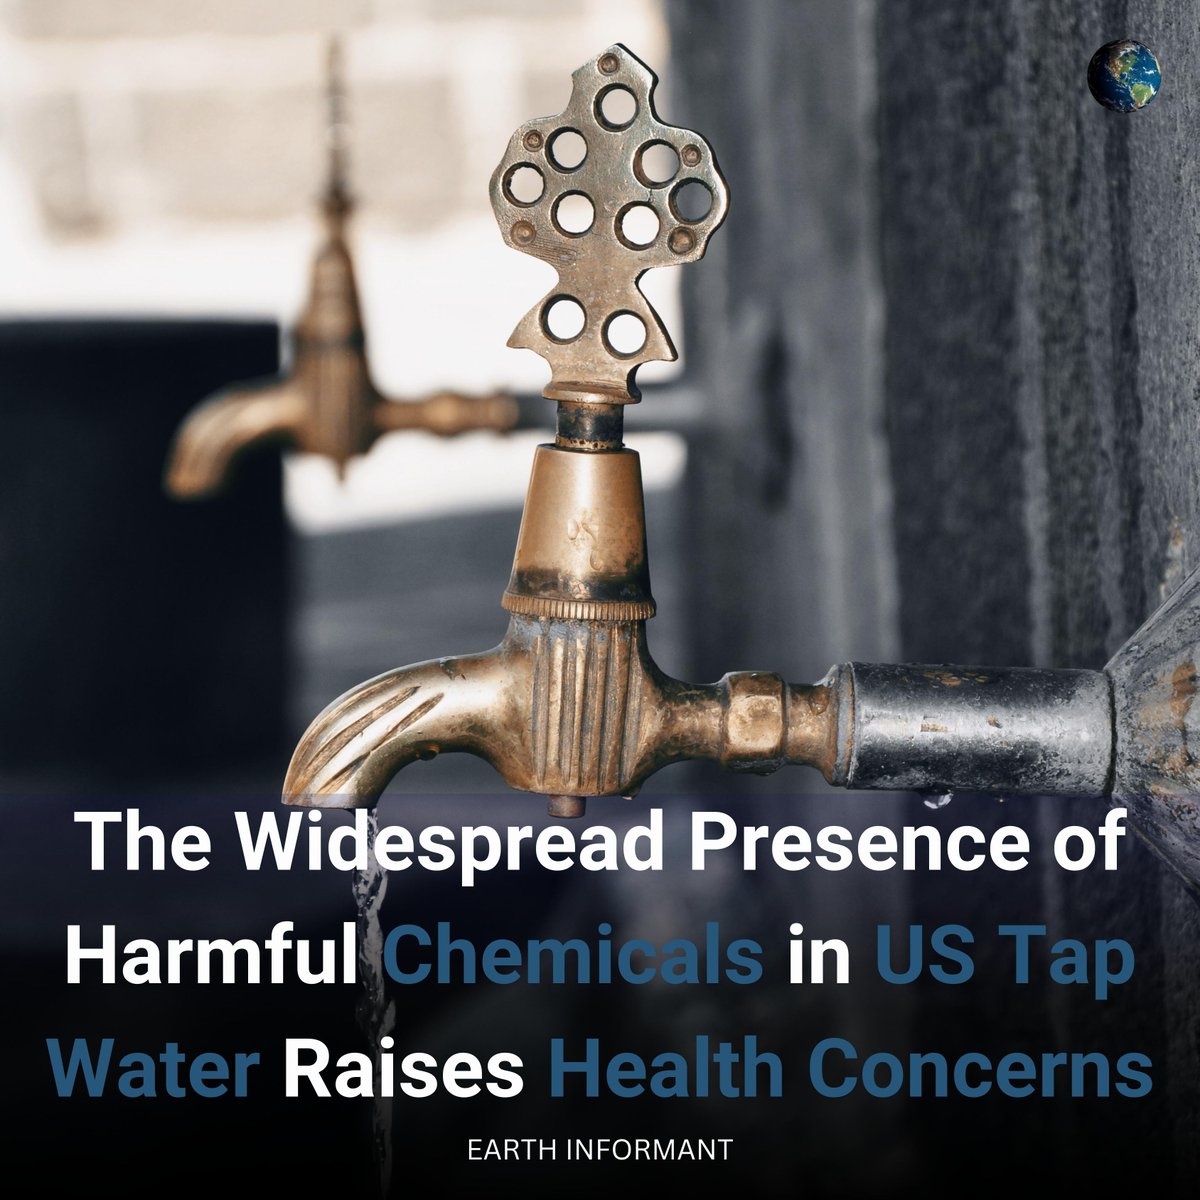 A recent government study conducted by the U.S. Geological Survey (USGS) has revealed that nearly half of the faucets in the United States
Discover more on our website through the link in our bio.

#PFASContamination #TapWaterSafety #WaterQuality #HealthConcerns #ForeverChemical